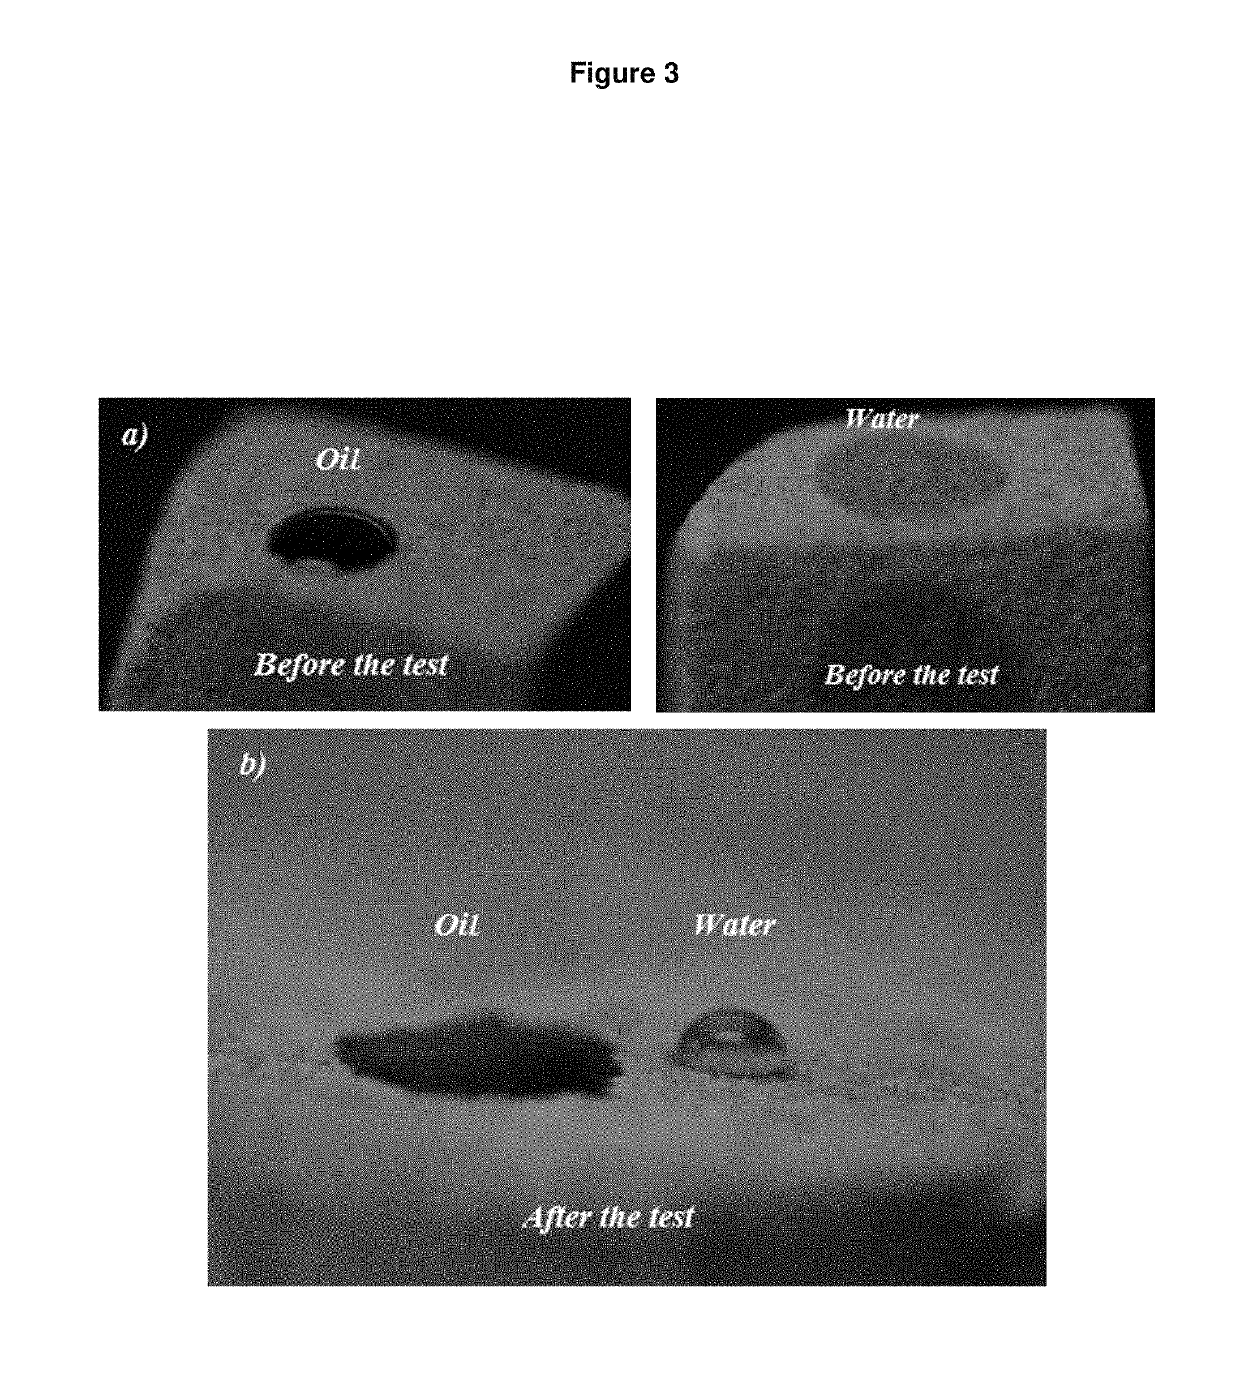 Hydrophobic compound emulsions free of silicon and fluorine for an oil recovering method that modifies the wettability of rocks from hydrophilic to oleophilic